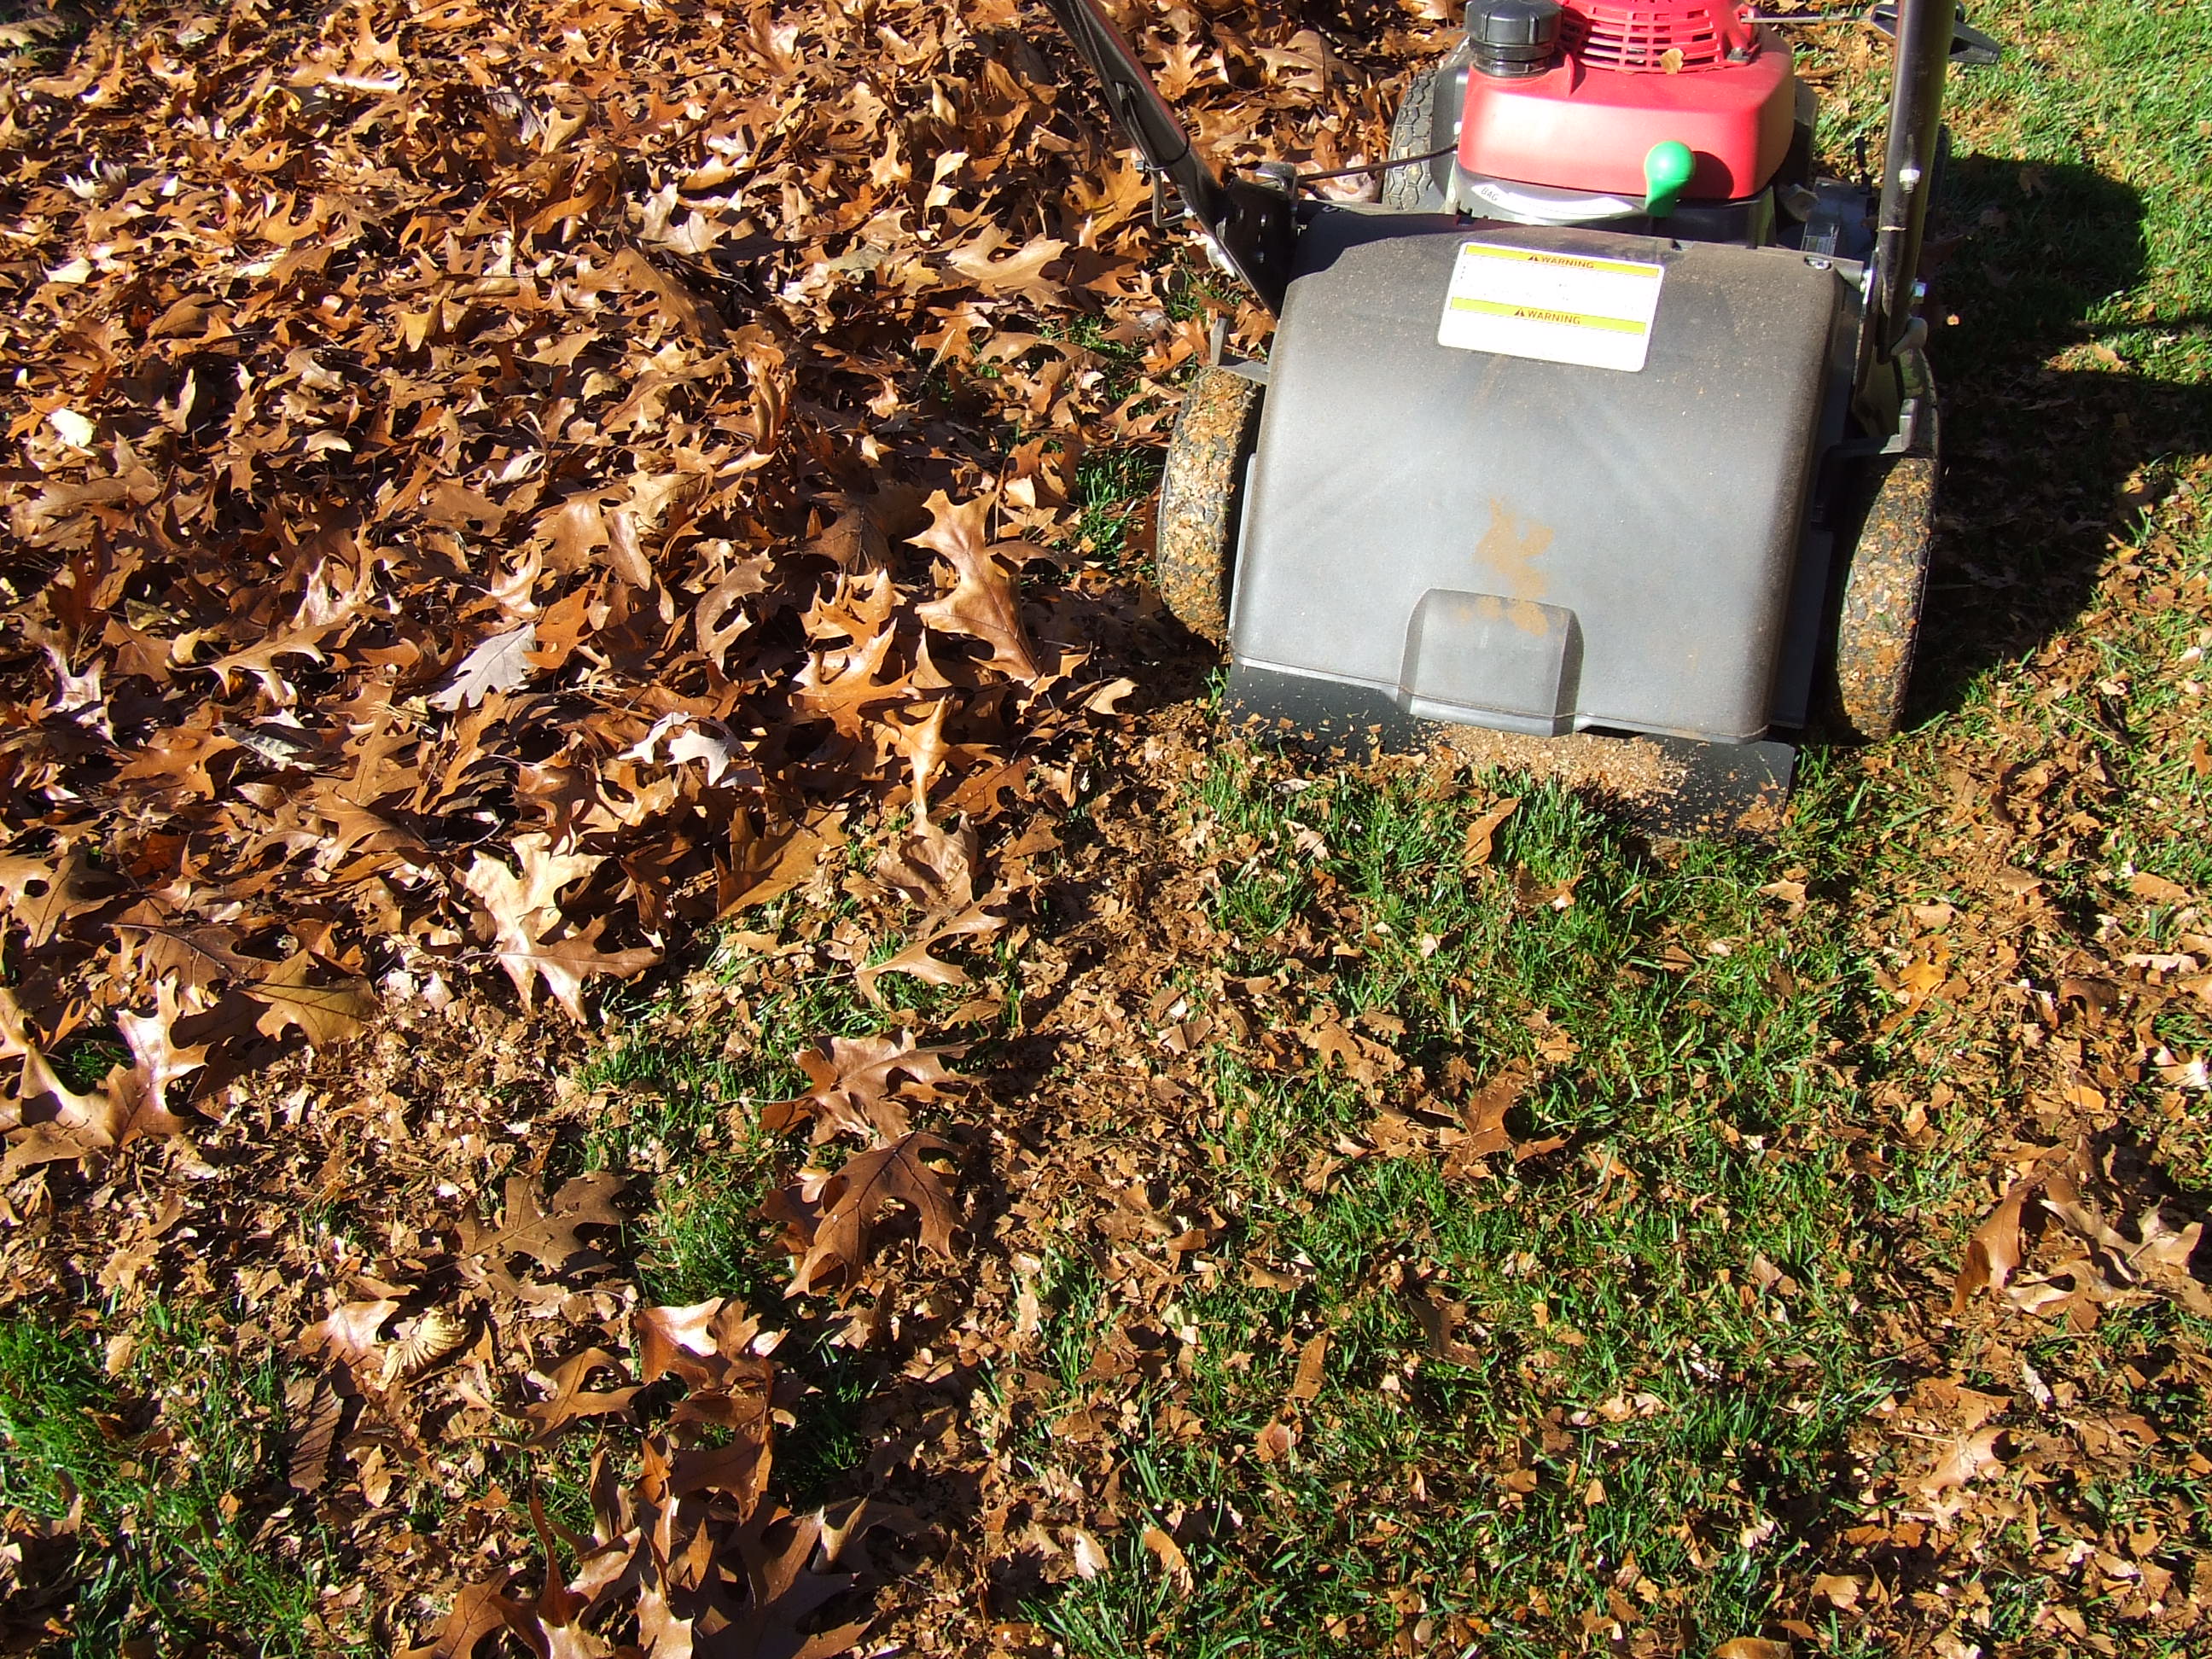 Want To Improve Your Lawn? Don't Bag Those Leaves : NPR